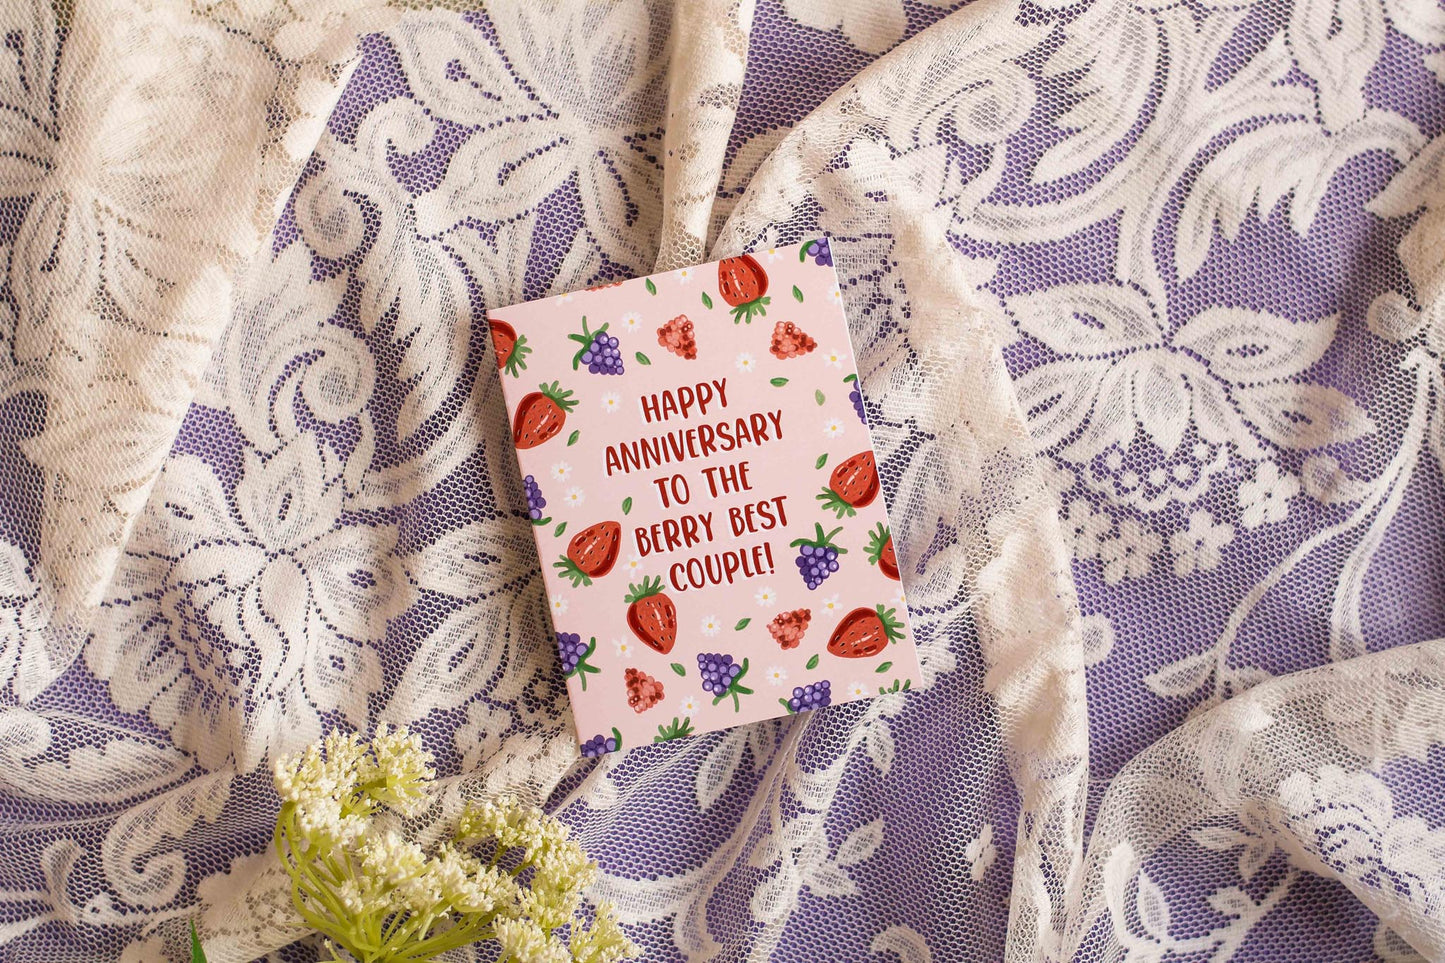 Happy Anniversary To The Berry Best Couple!- Greeting Card